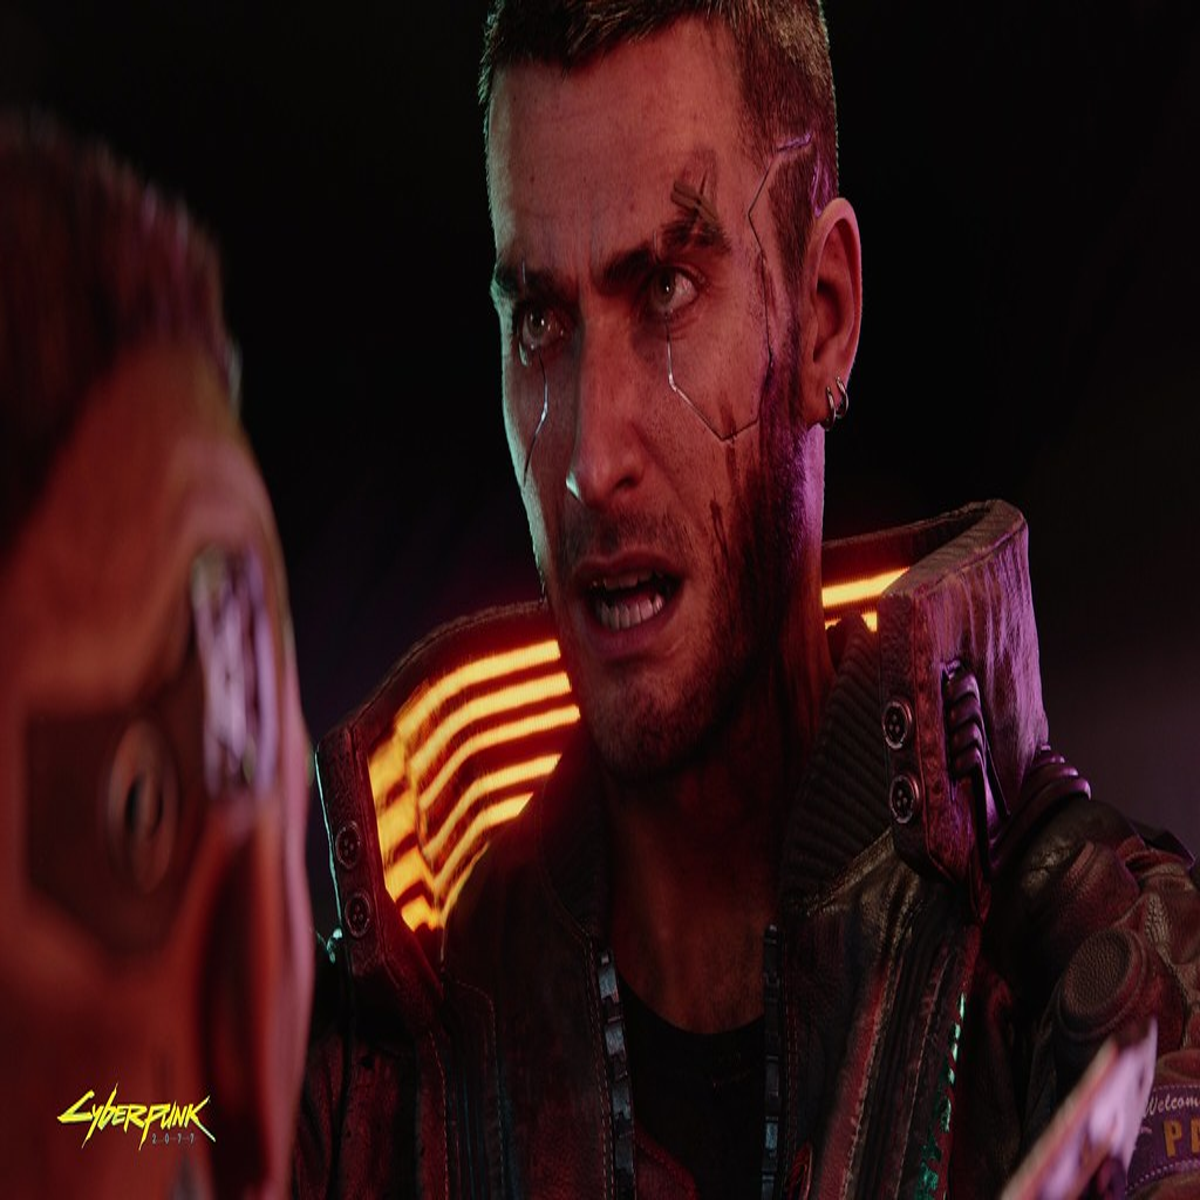 CDPR: We Wouldn't Be Able to Make Cyberpunk 2077 with the Old